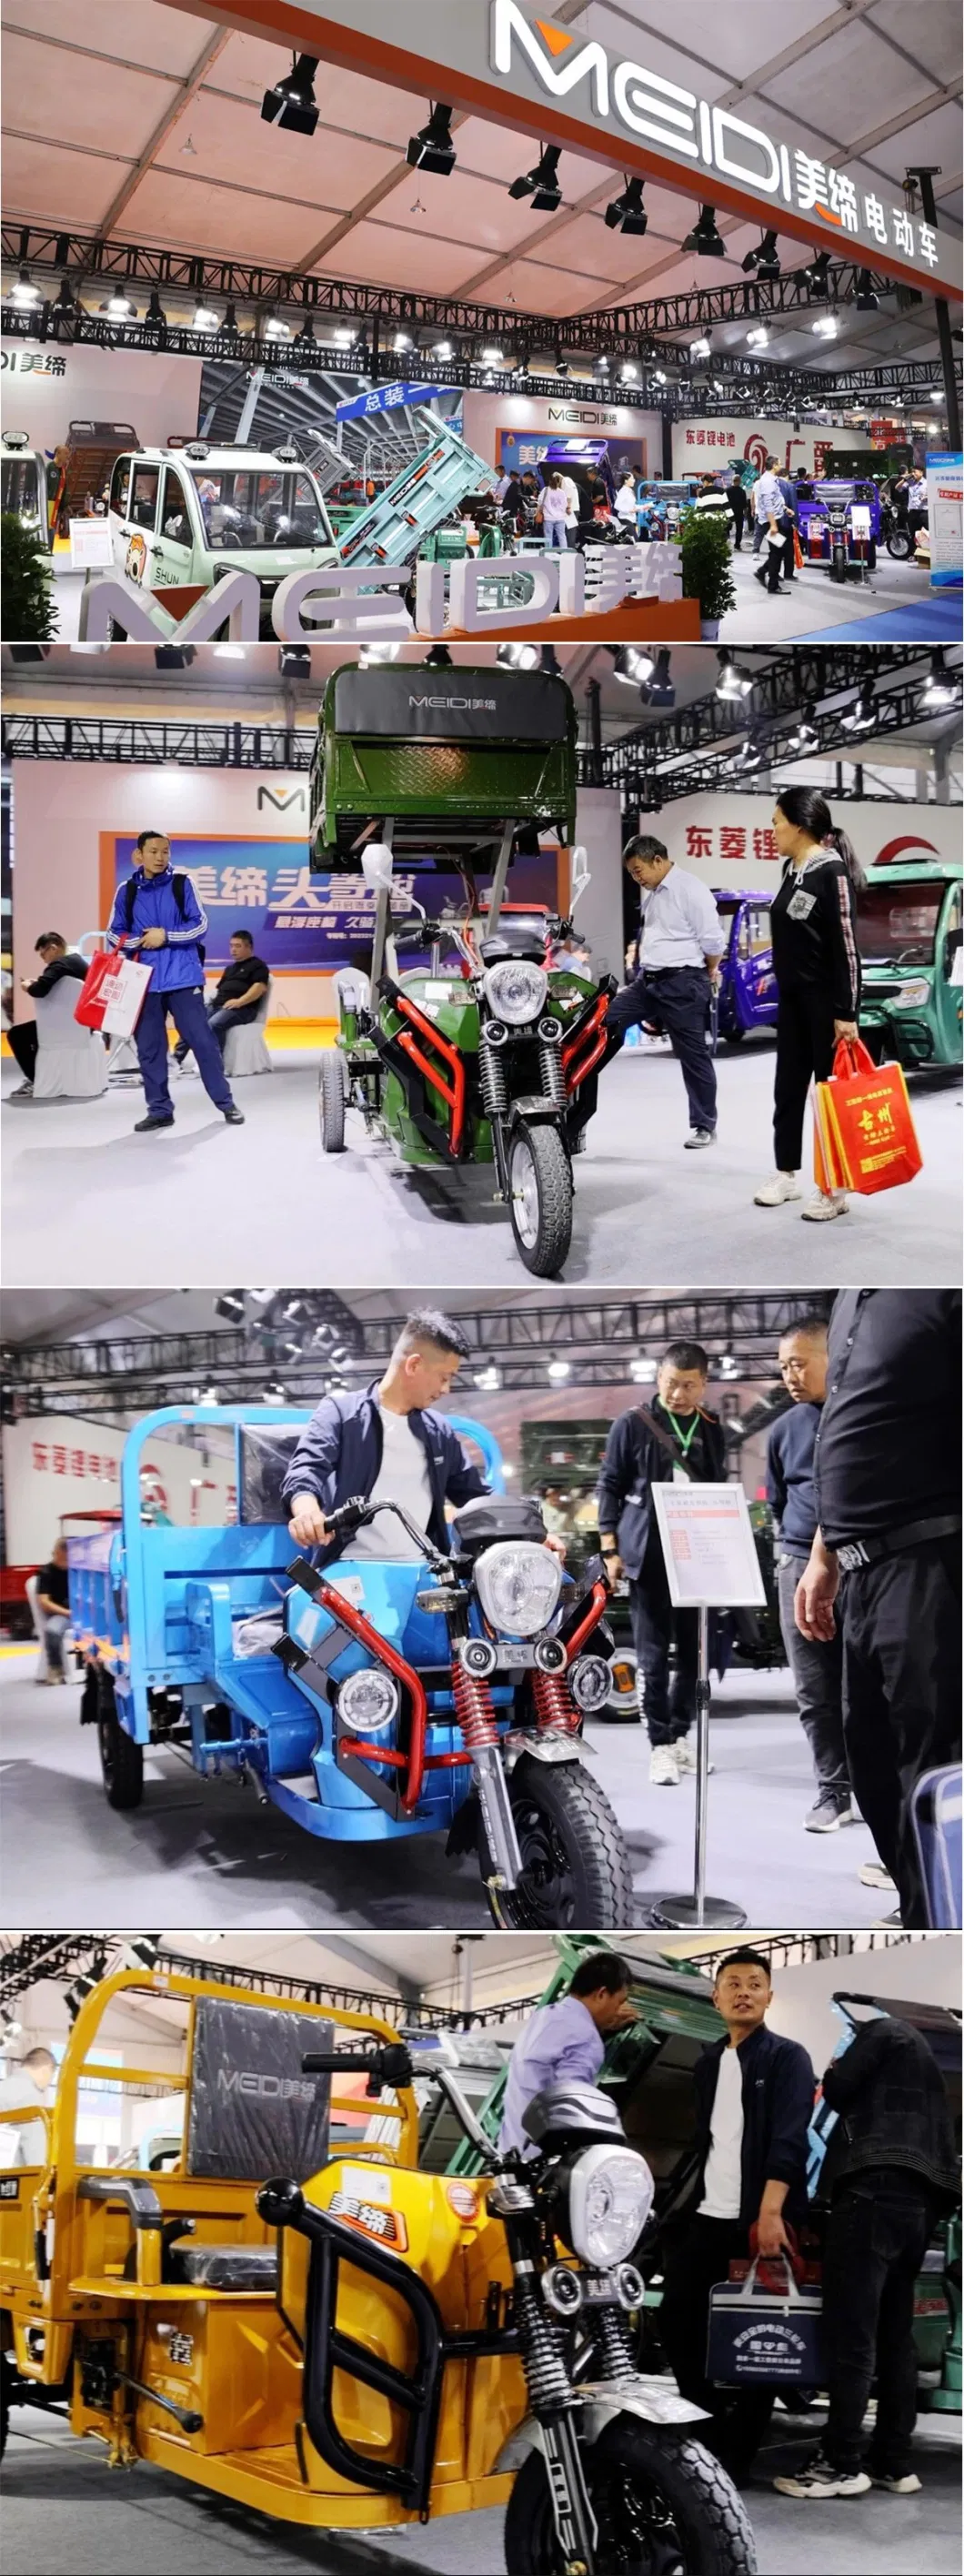 Meidi Cheap 4 Seats Low Speed 35km/H Electric Passenger Tricycle Three Wheel Motorcycle Taxi